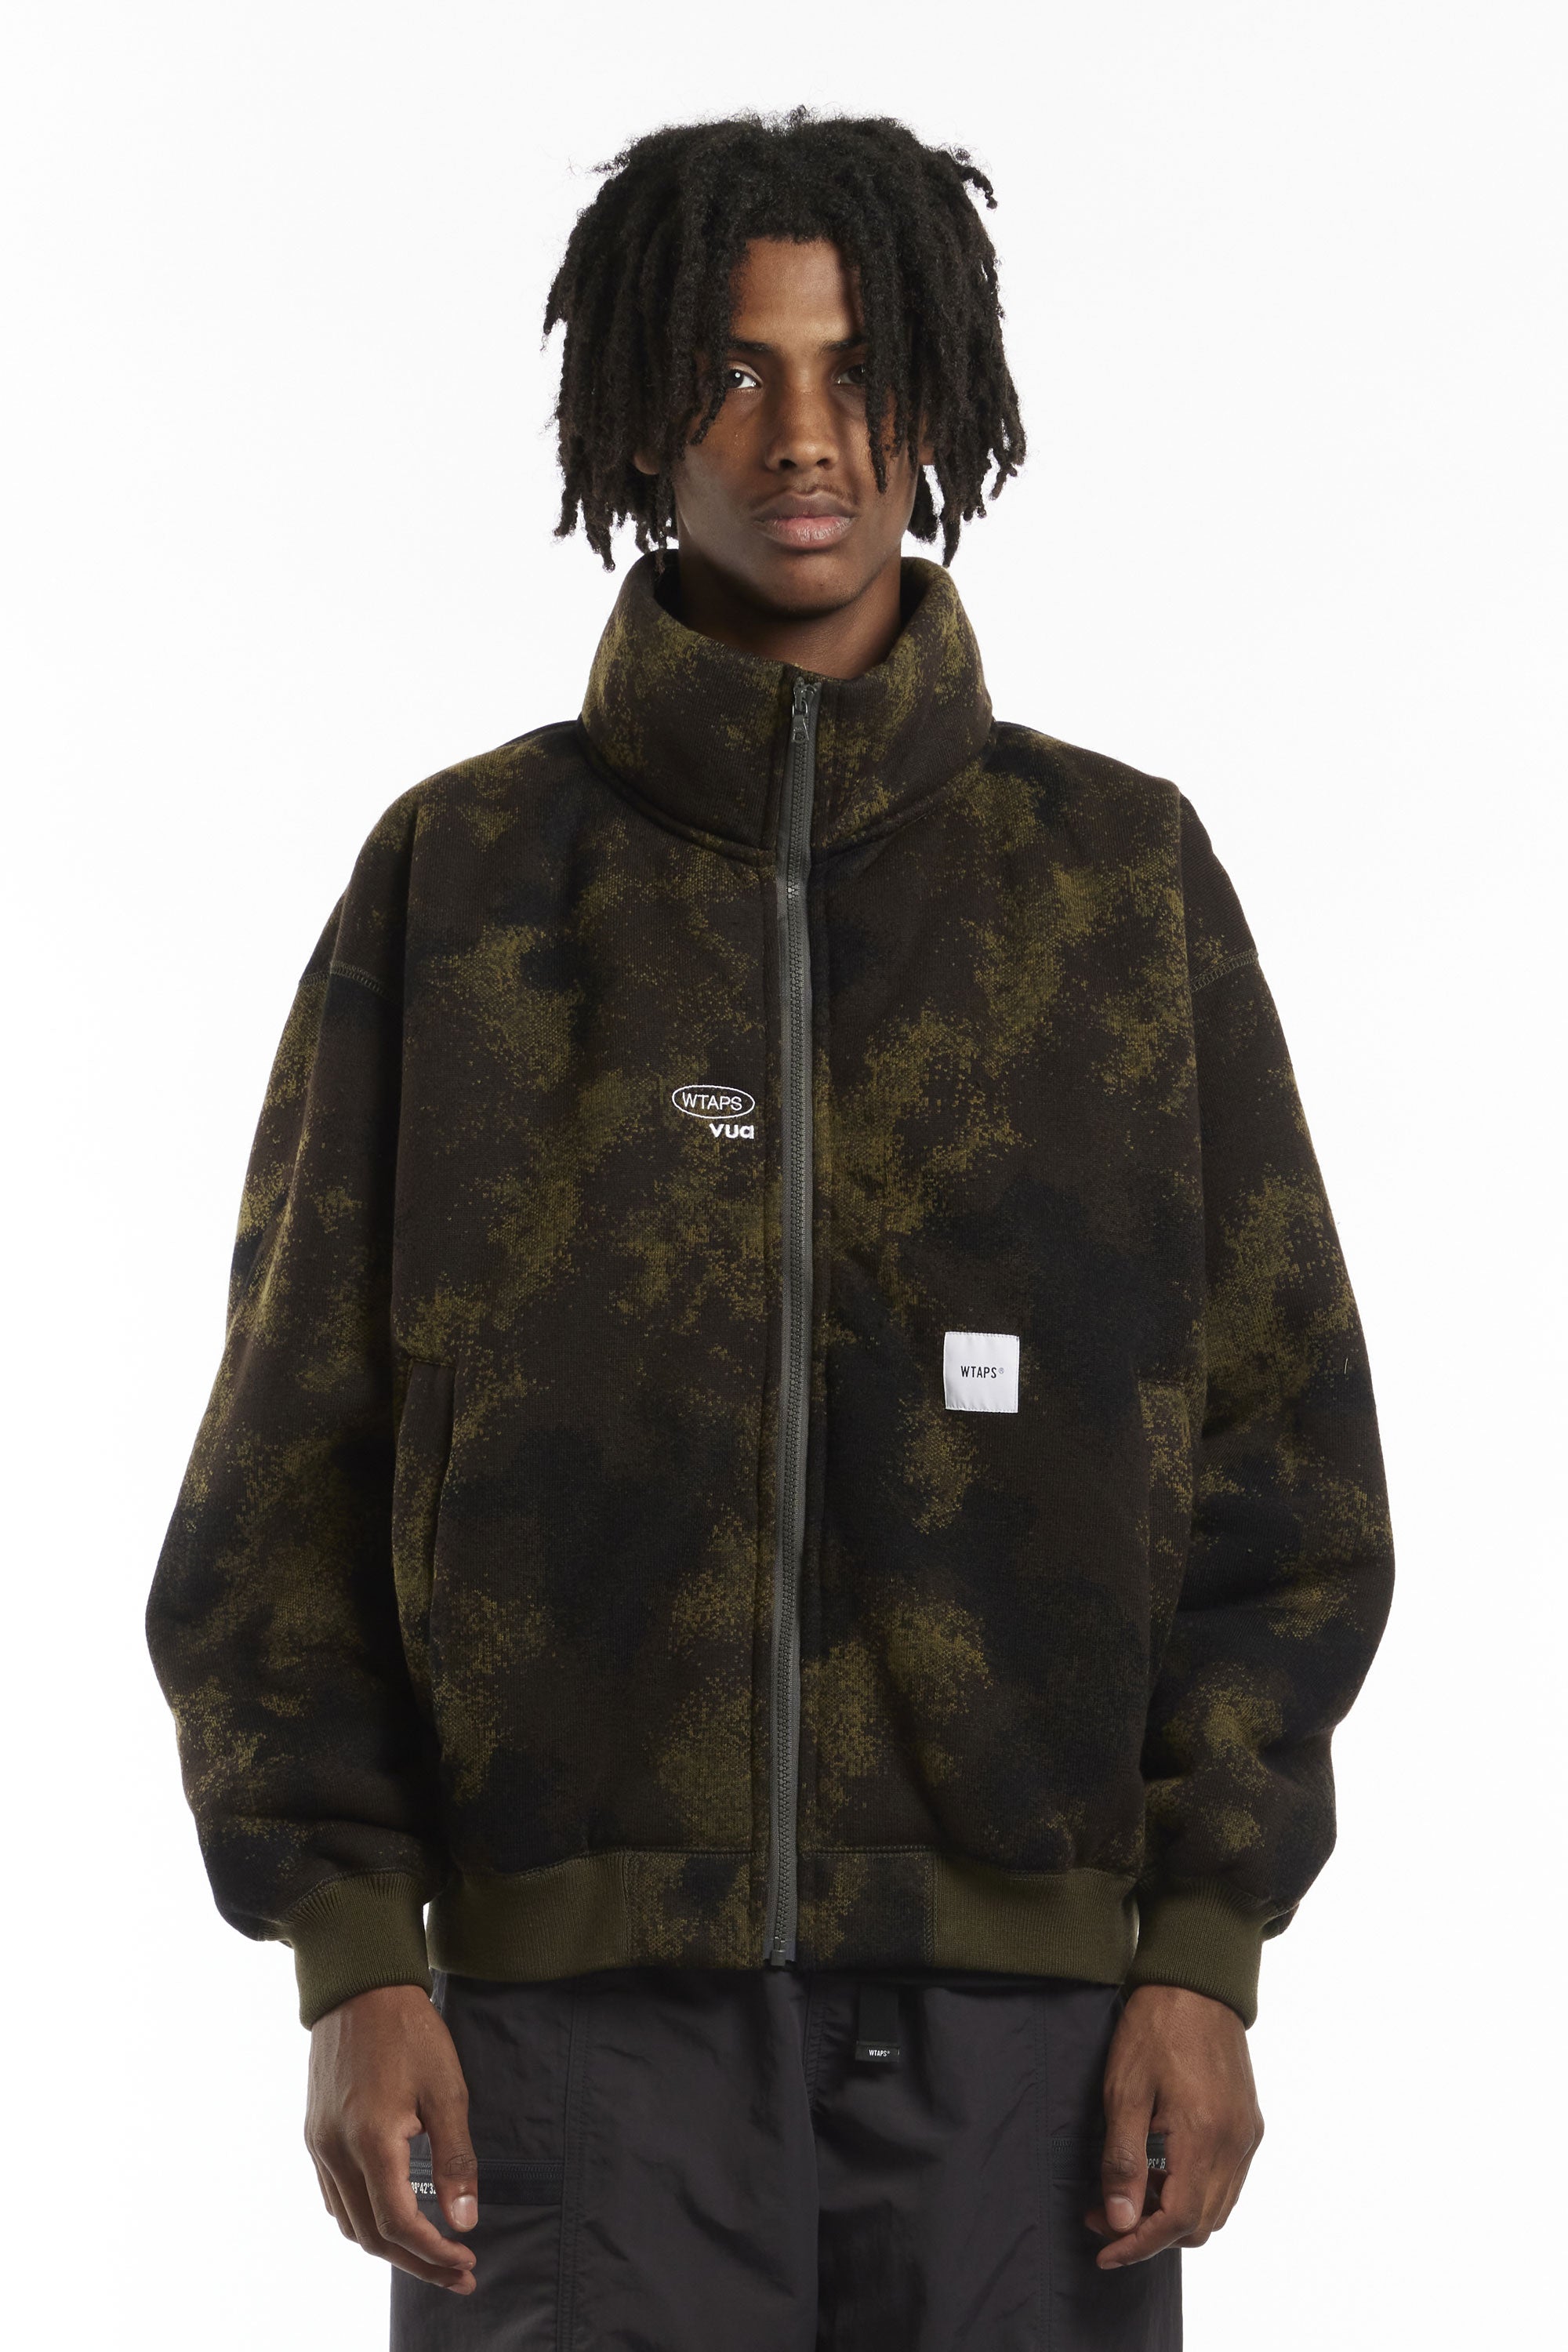 WTAPS - JFW-02 WEATHER JACKET – P.A.M. (Perks And Mini)